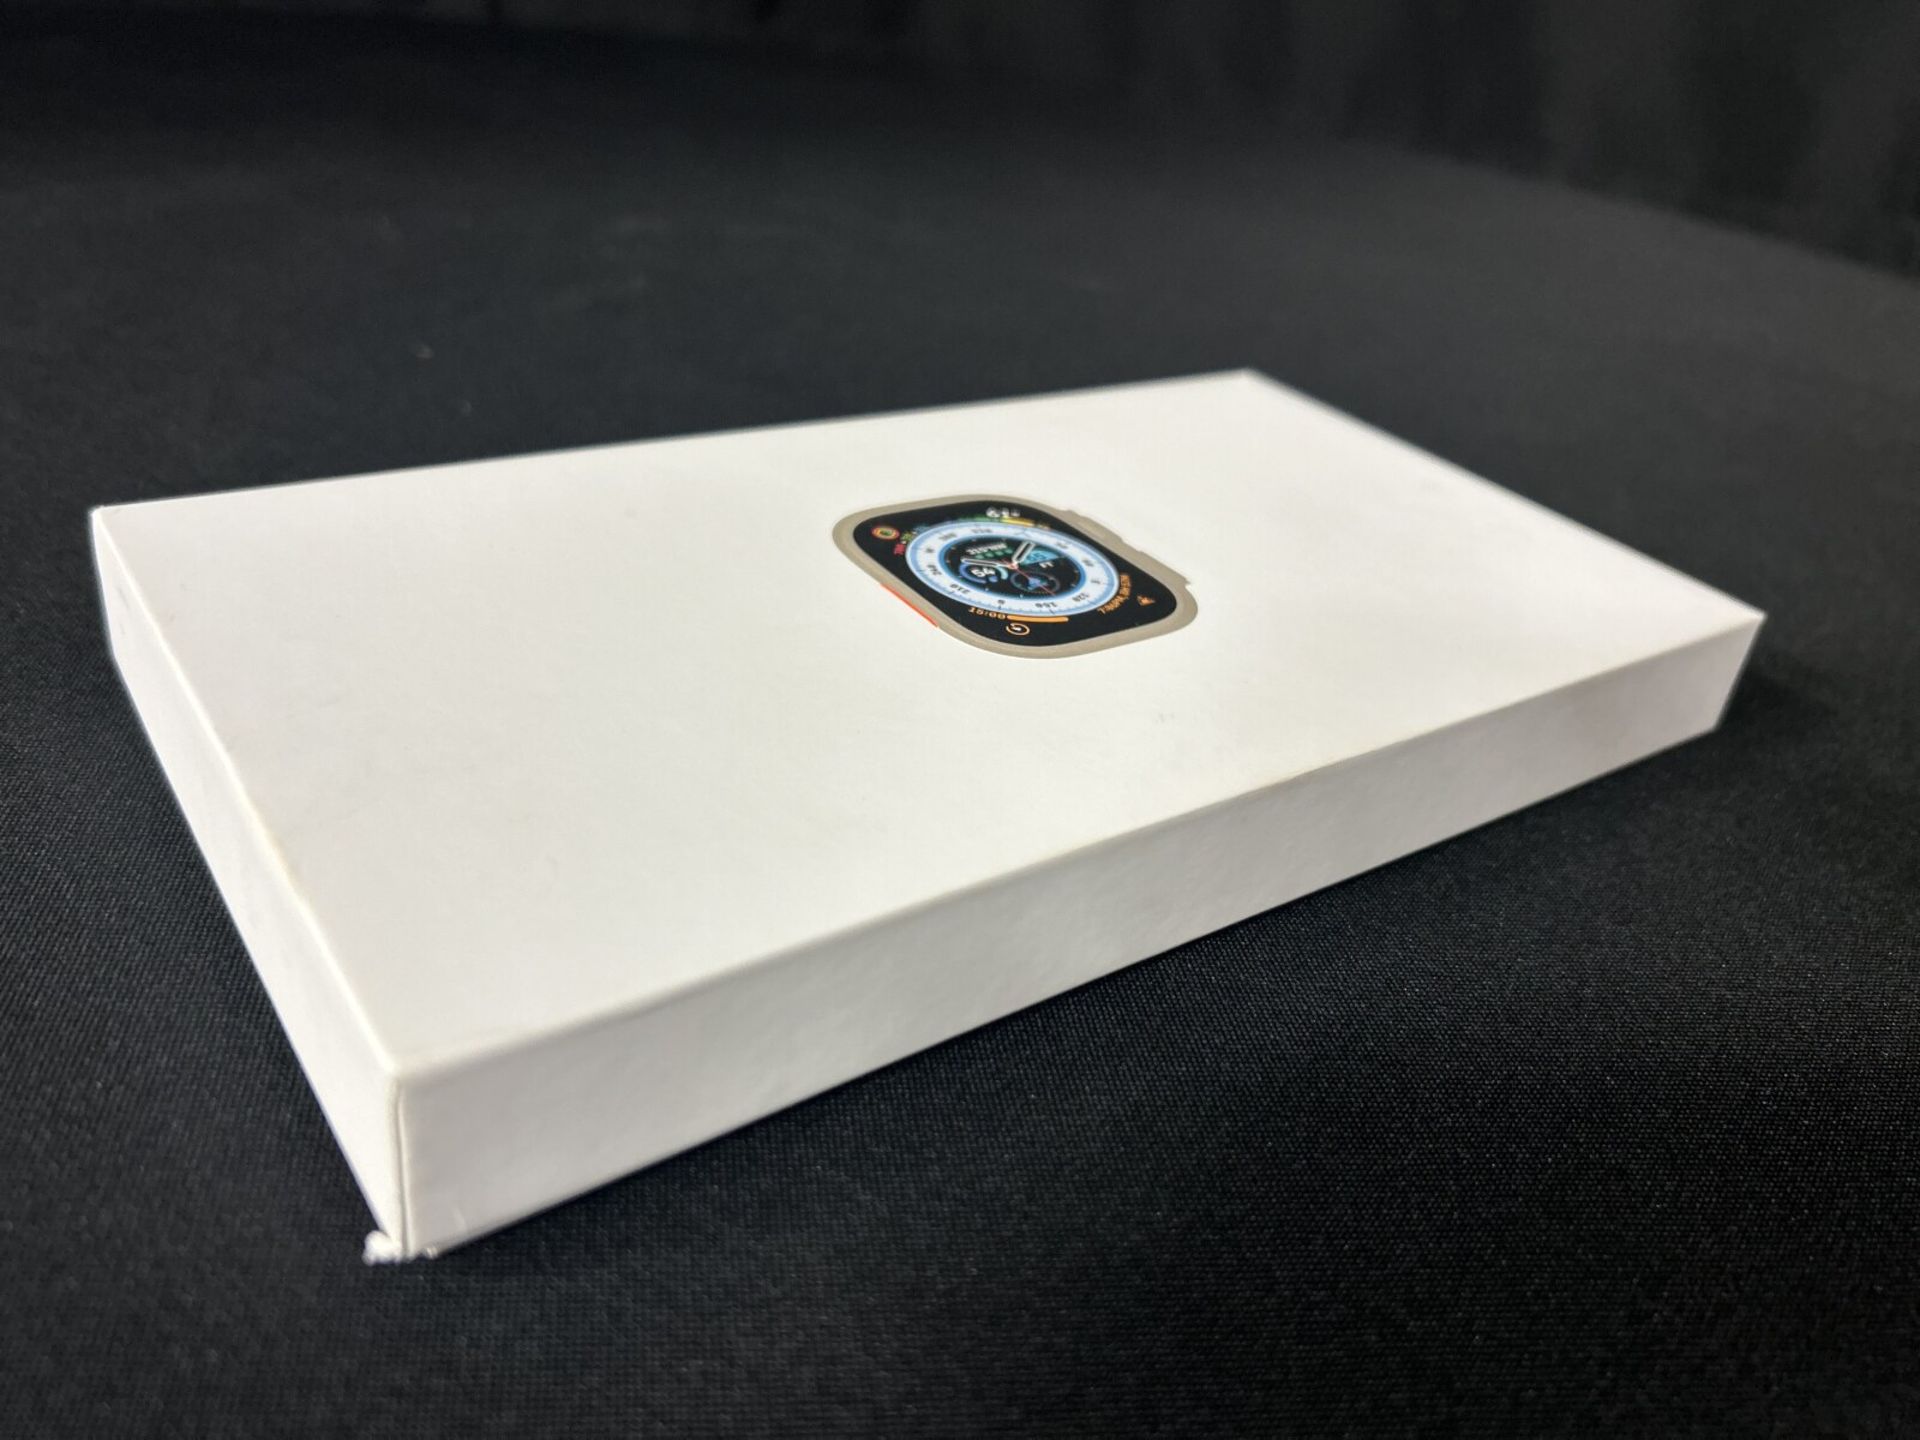 APPLE WATCH (NEW IN BOX) - A26 - Image 3 of 4